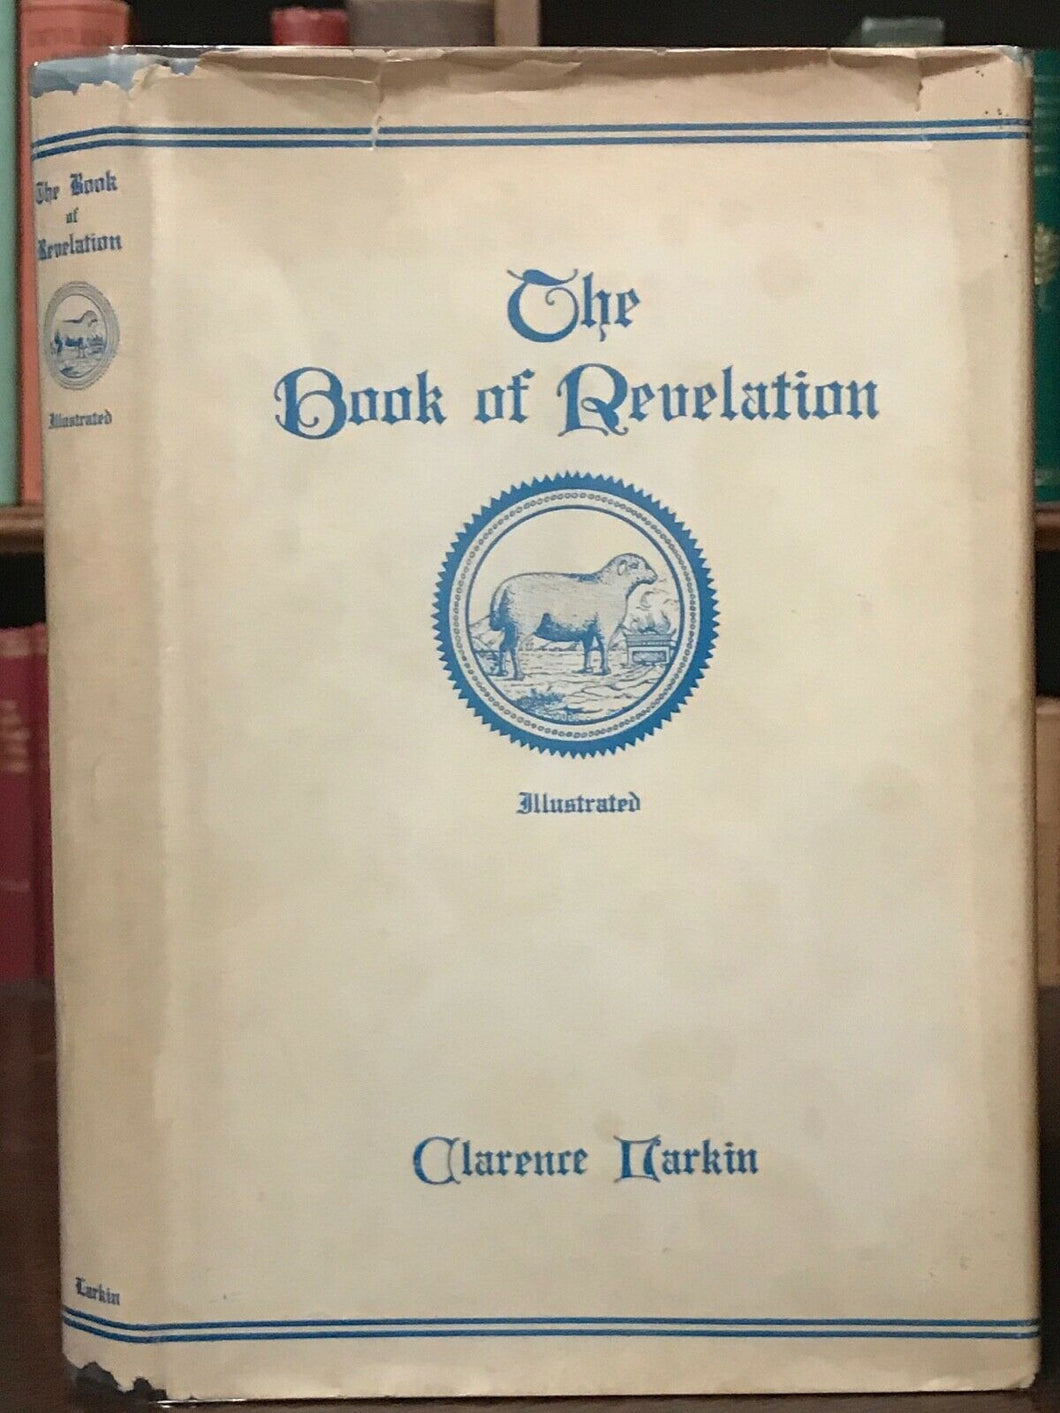 THE BOOK OF REVELATION - Larkin - PROPHECY BIBLE PROPHETIC END OF DAYS SCRIPTURE